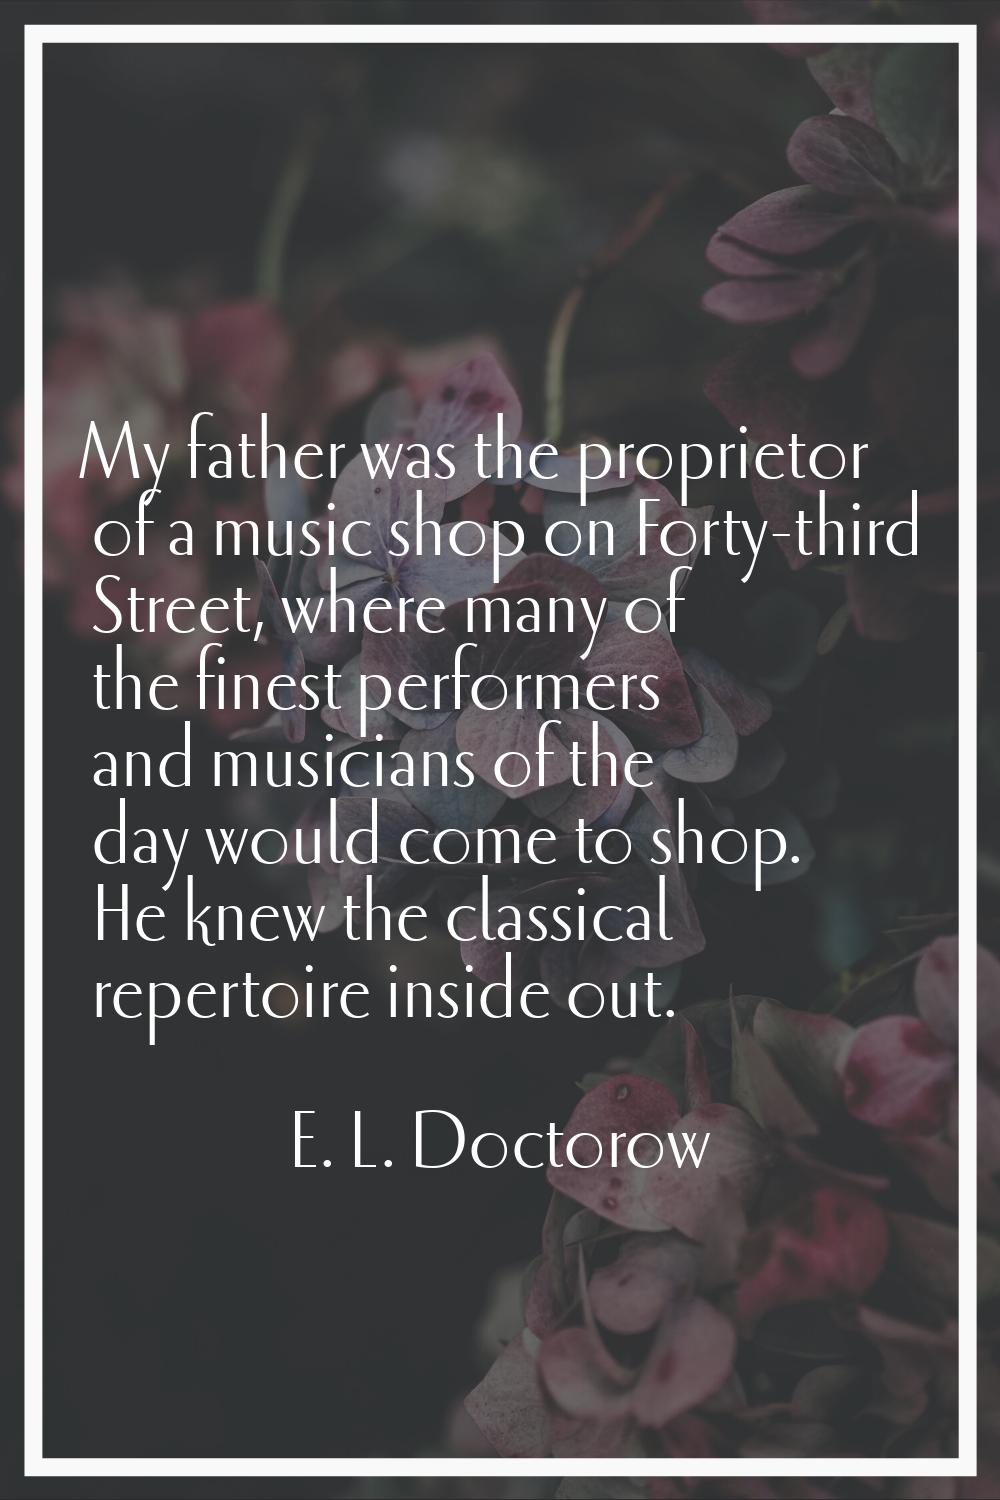 My father was the proprietor of a music shop on Forty-third Street, where many of the finest perfor